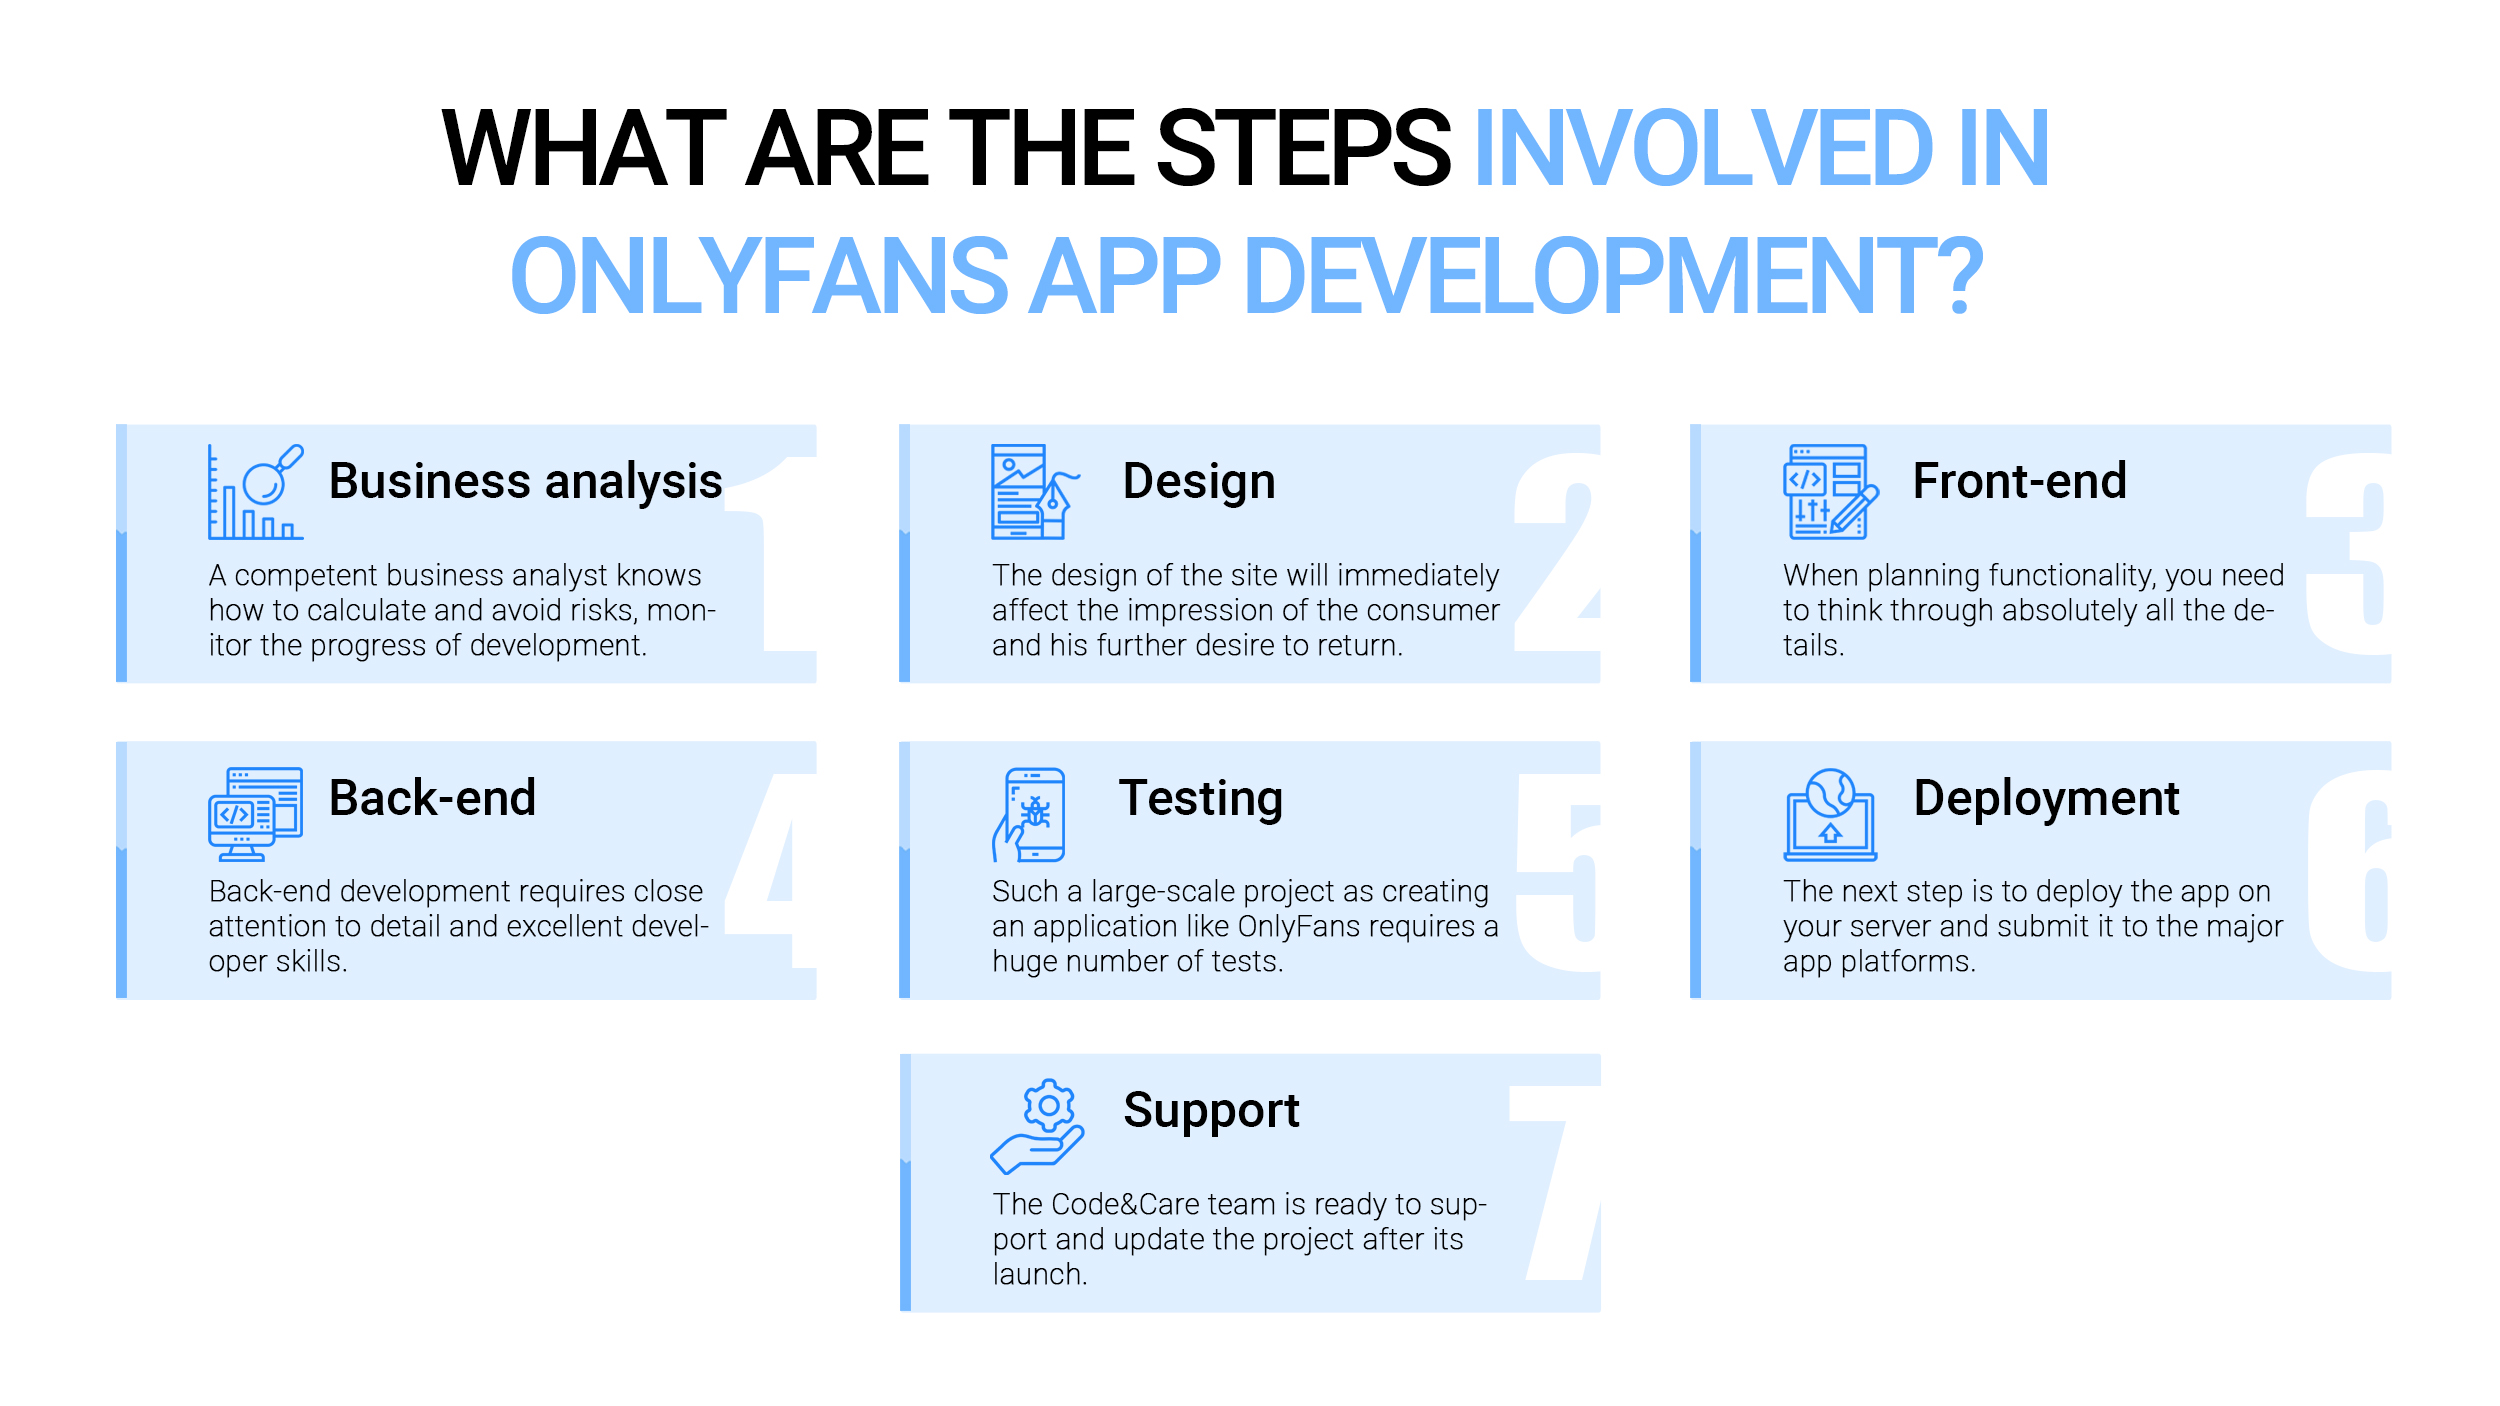 What are the steps involved in OnlyFans app development